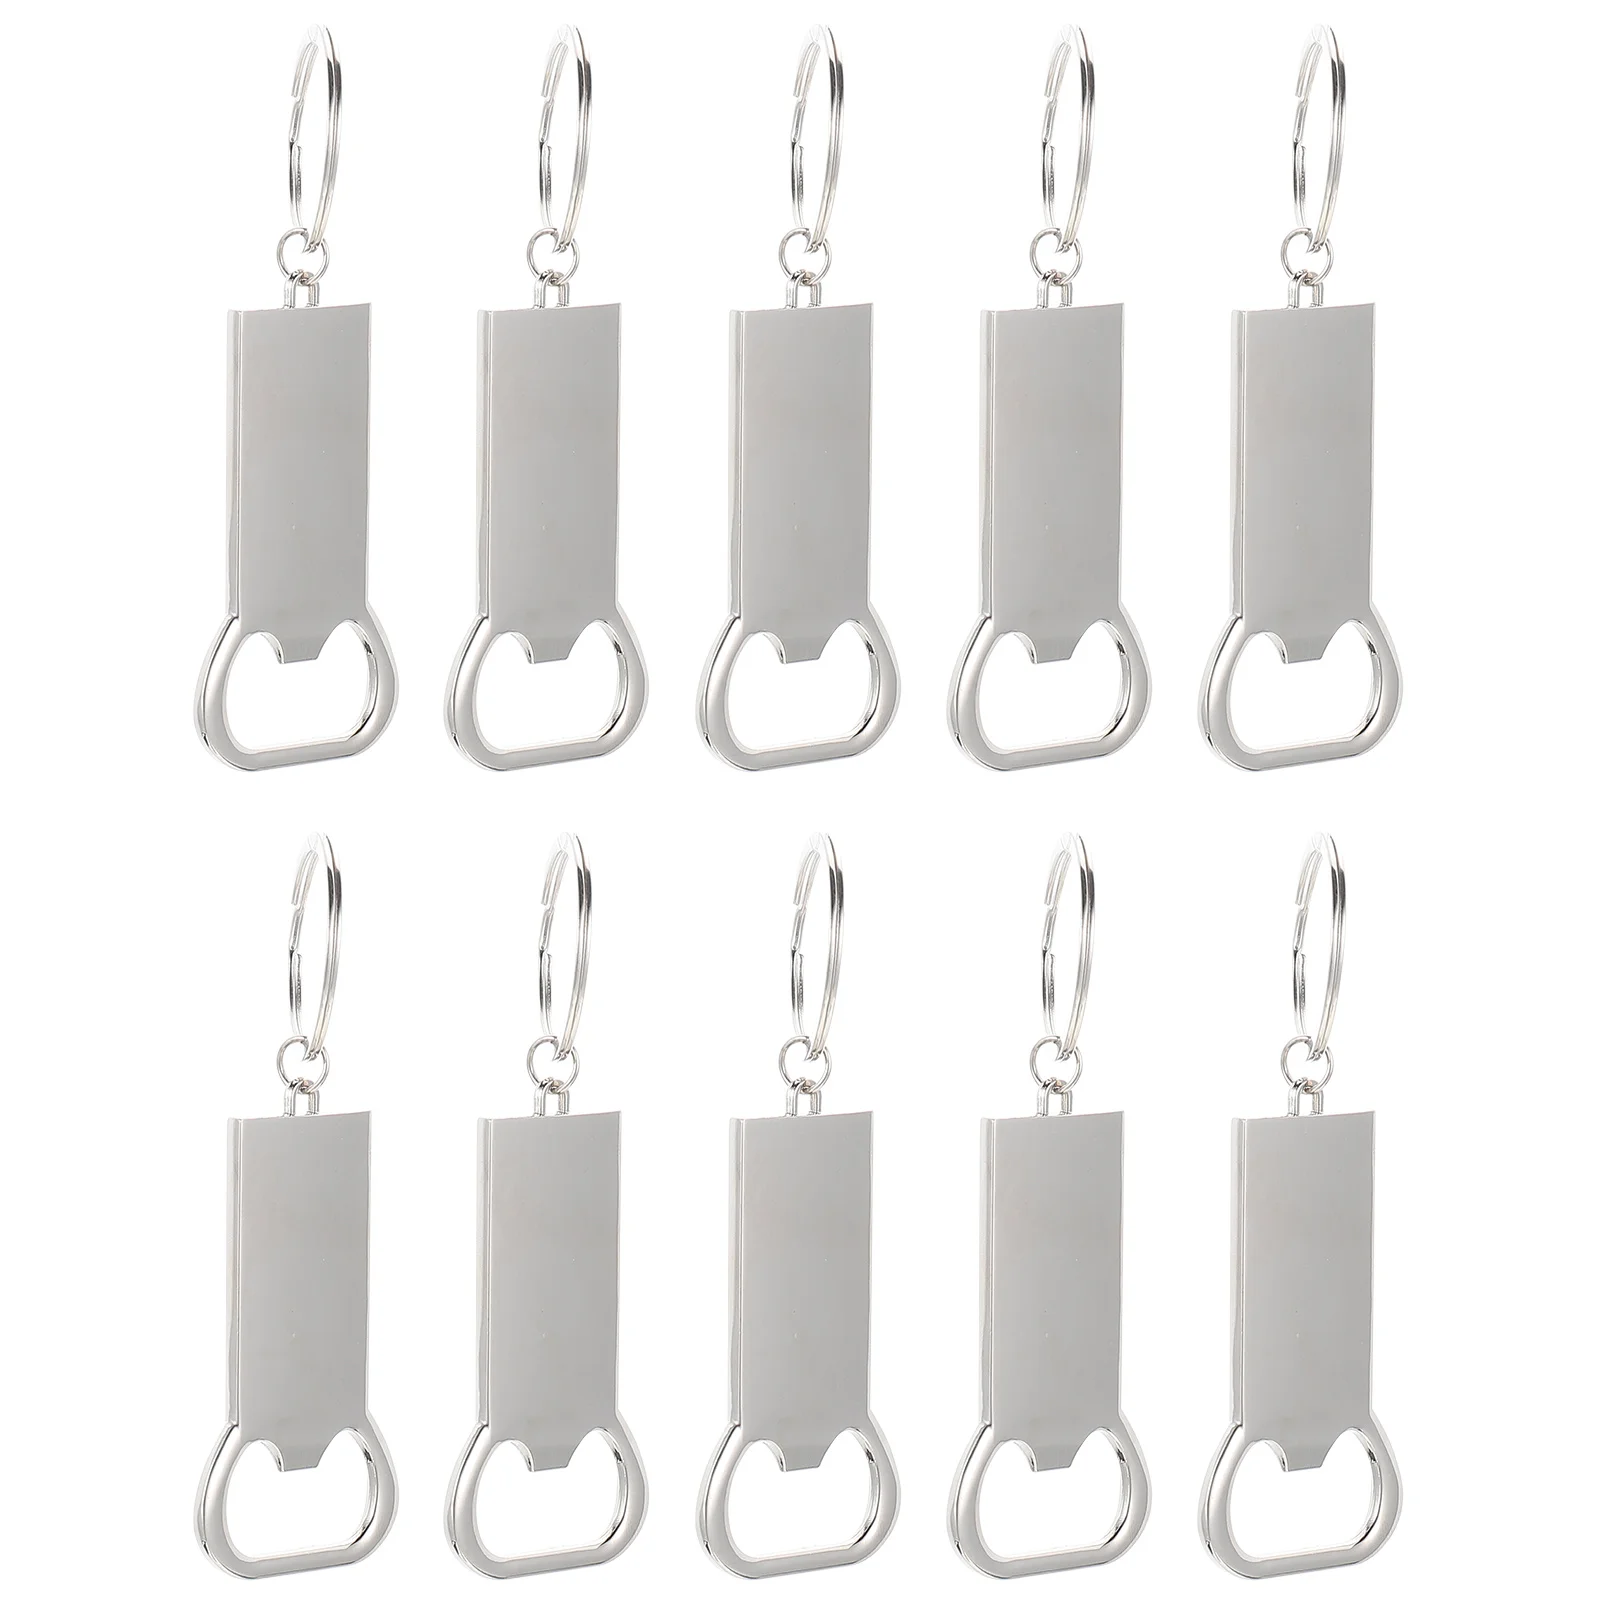 

10 Pcs Keychain Bottle Opener Convenient Blank Soda Can Lids Decorate Multi-function Zinc Alloy Beer Hanging Photo